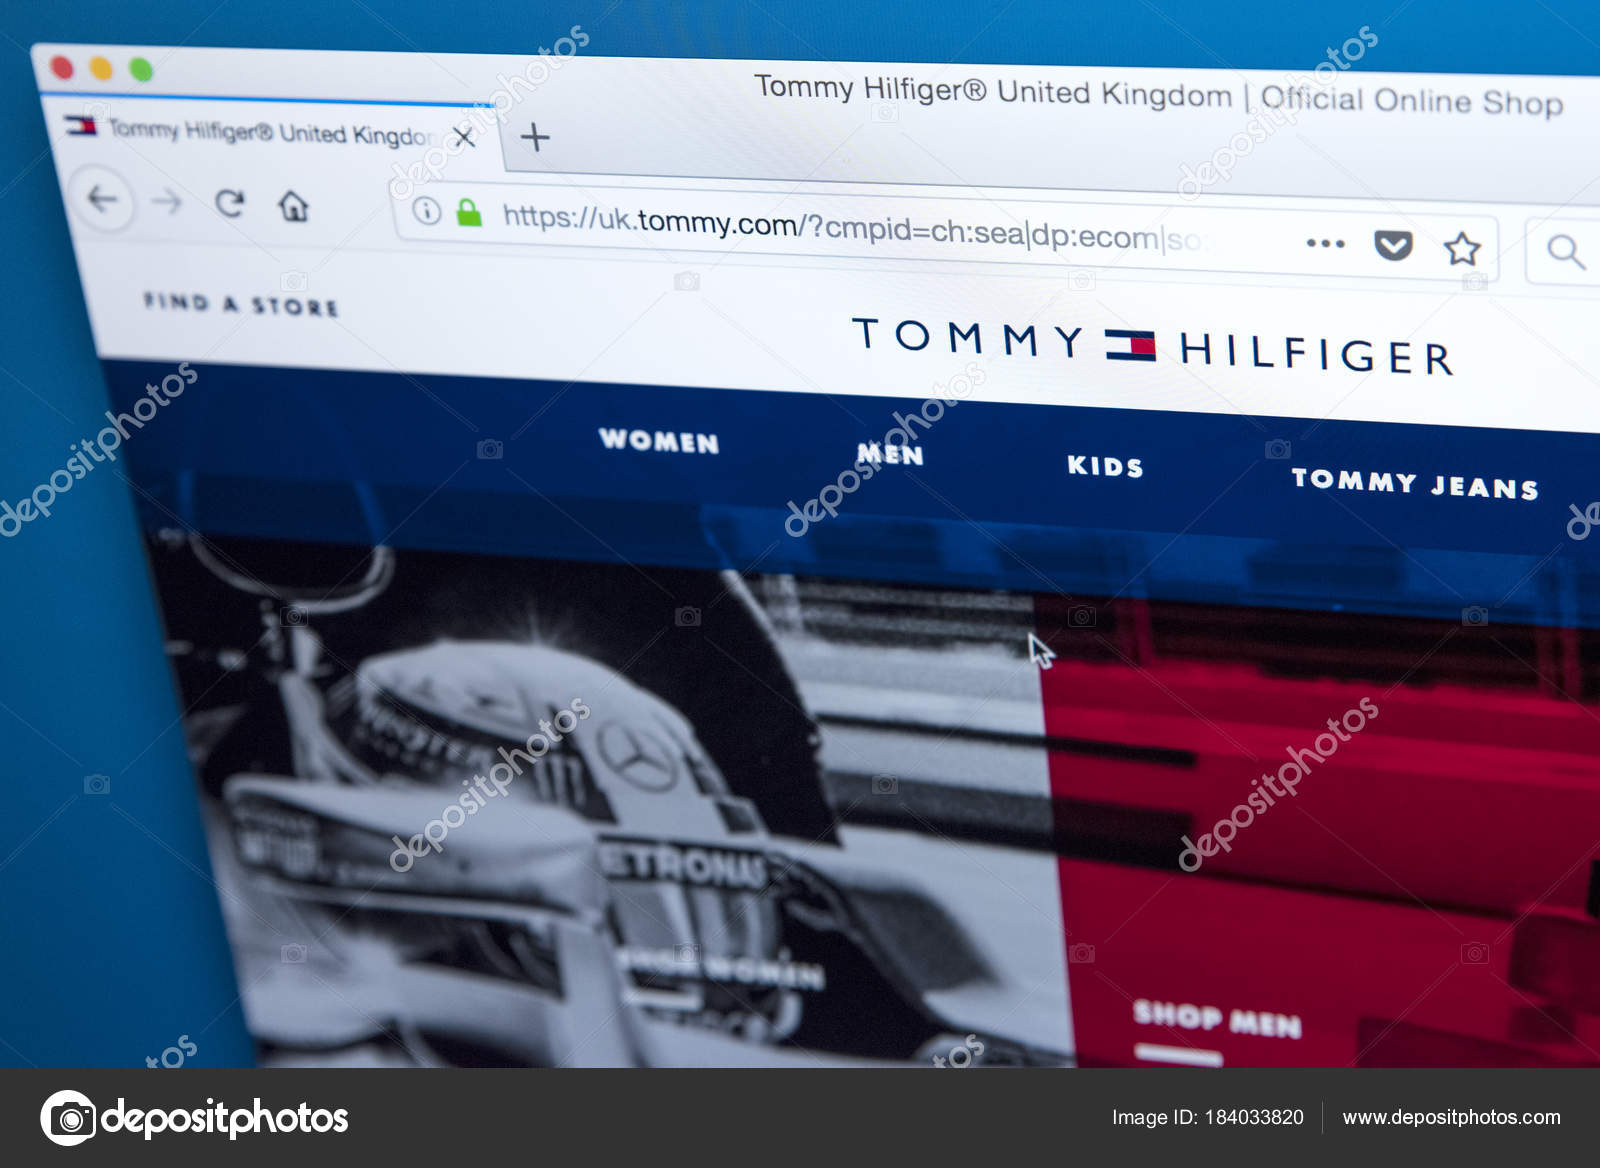 tommy hilfiger site Online shopping never been as